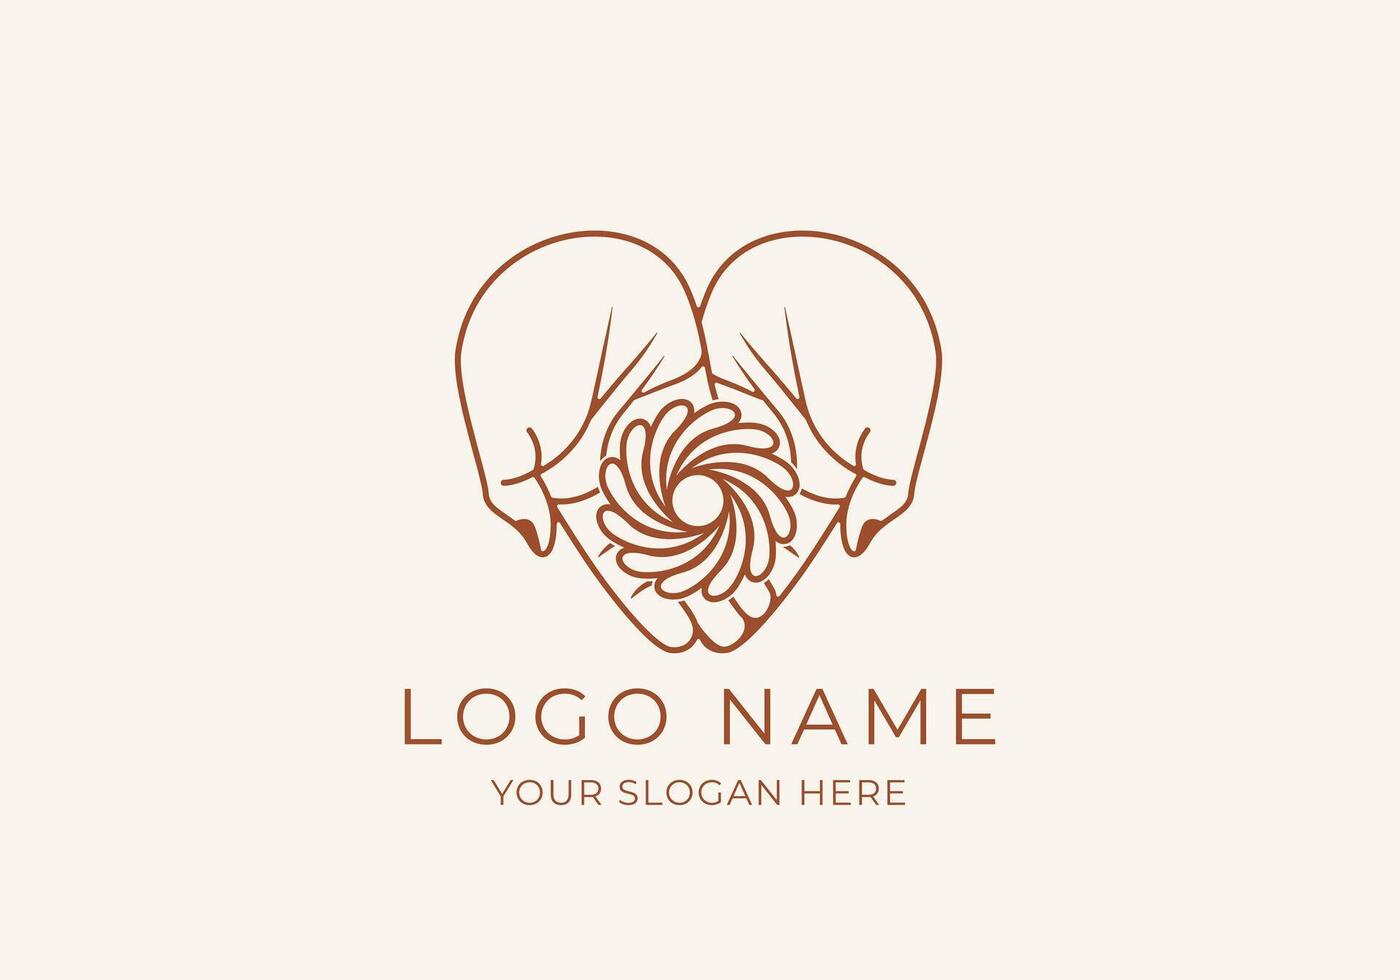 Logo Line Open Hand Looking Up or Asking or Pray With Spiral concept, Hole, Spiral Logo Concept. Boho, Line, handrawn logo design, editable color vector